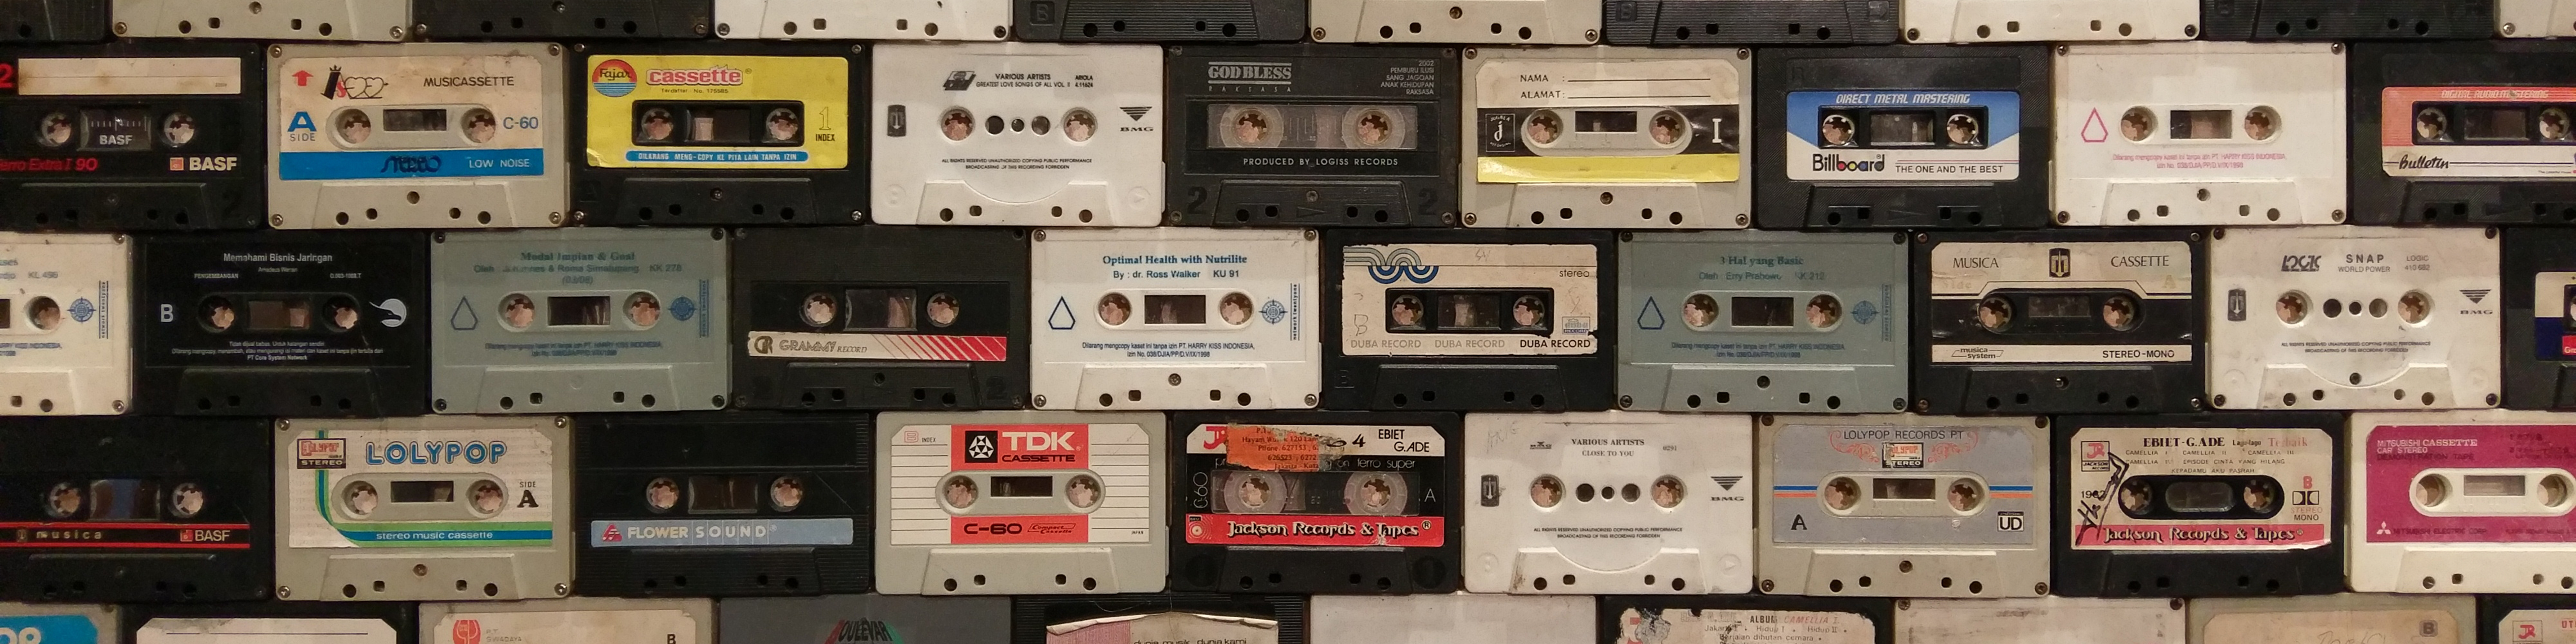 Full Frame Shot Of a wall of Audio Cassettes